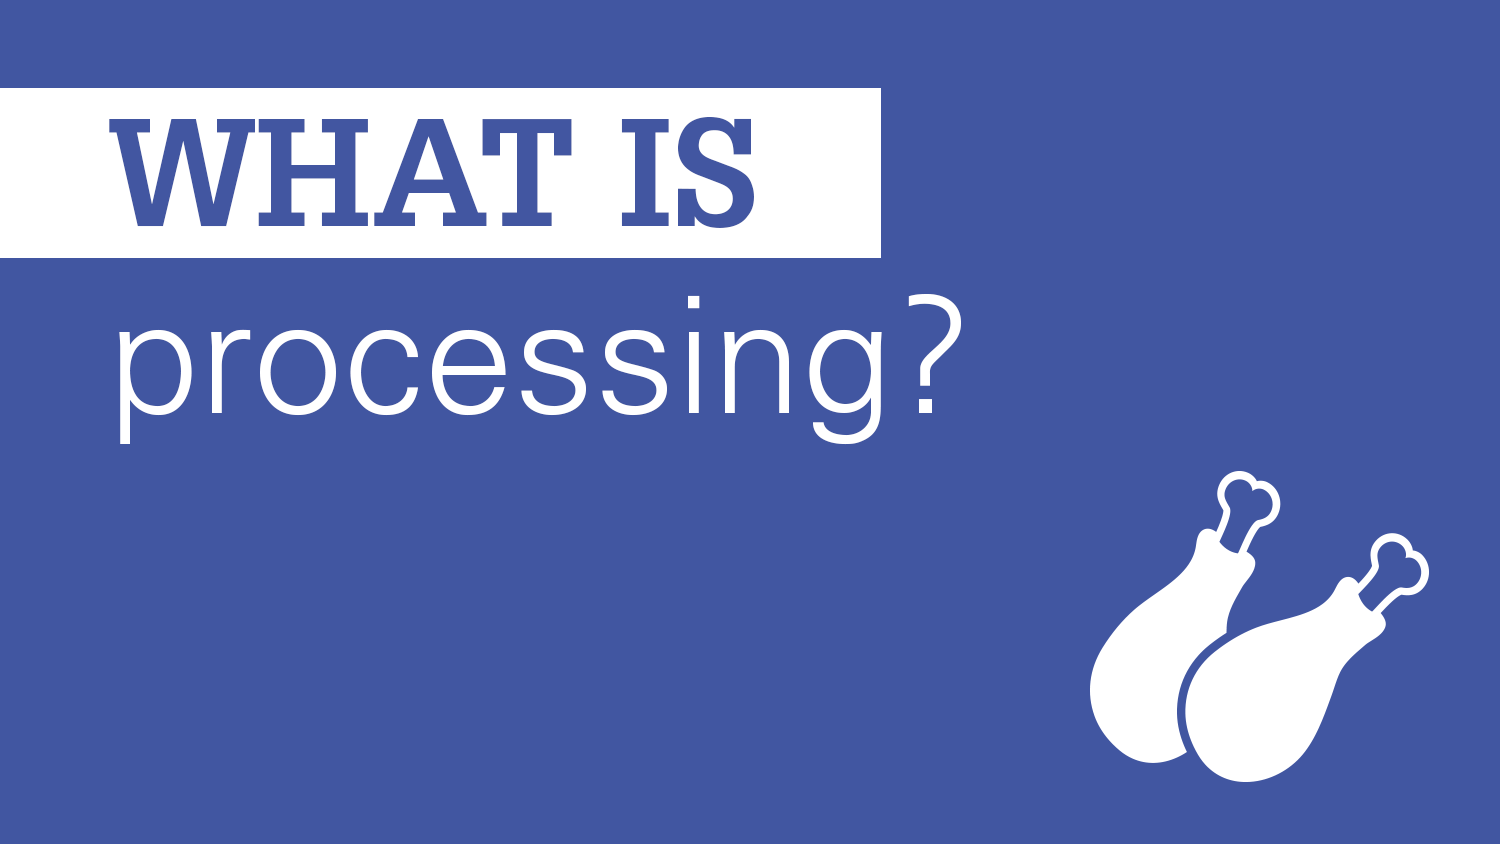 blue and white image showing the question 'what is processing' and an icon of drumsticks